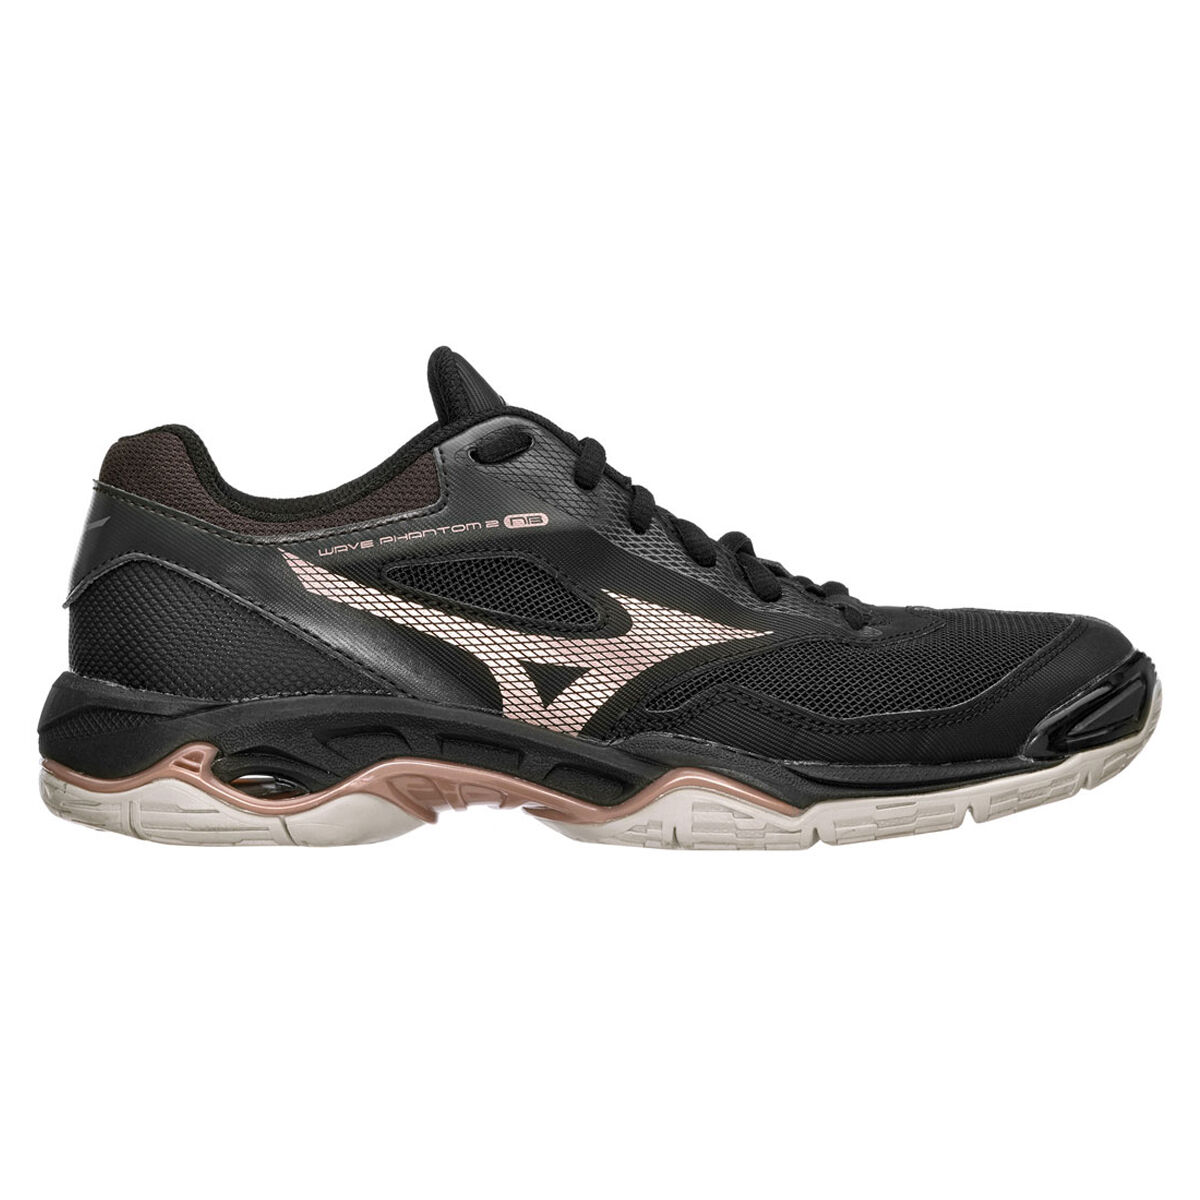 mizuno shoes afterpay